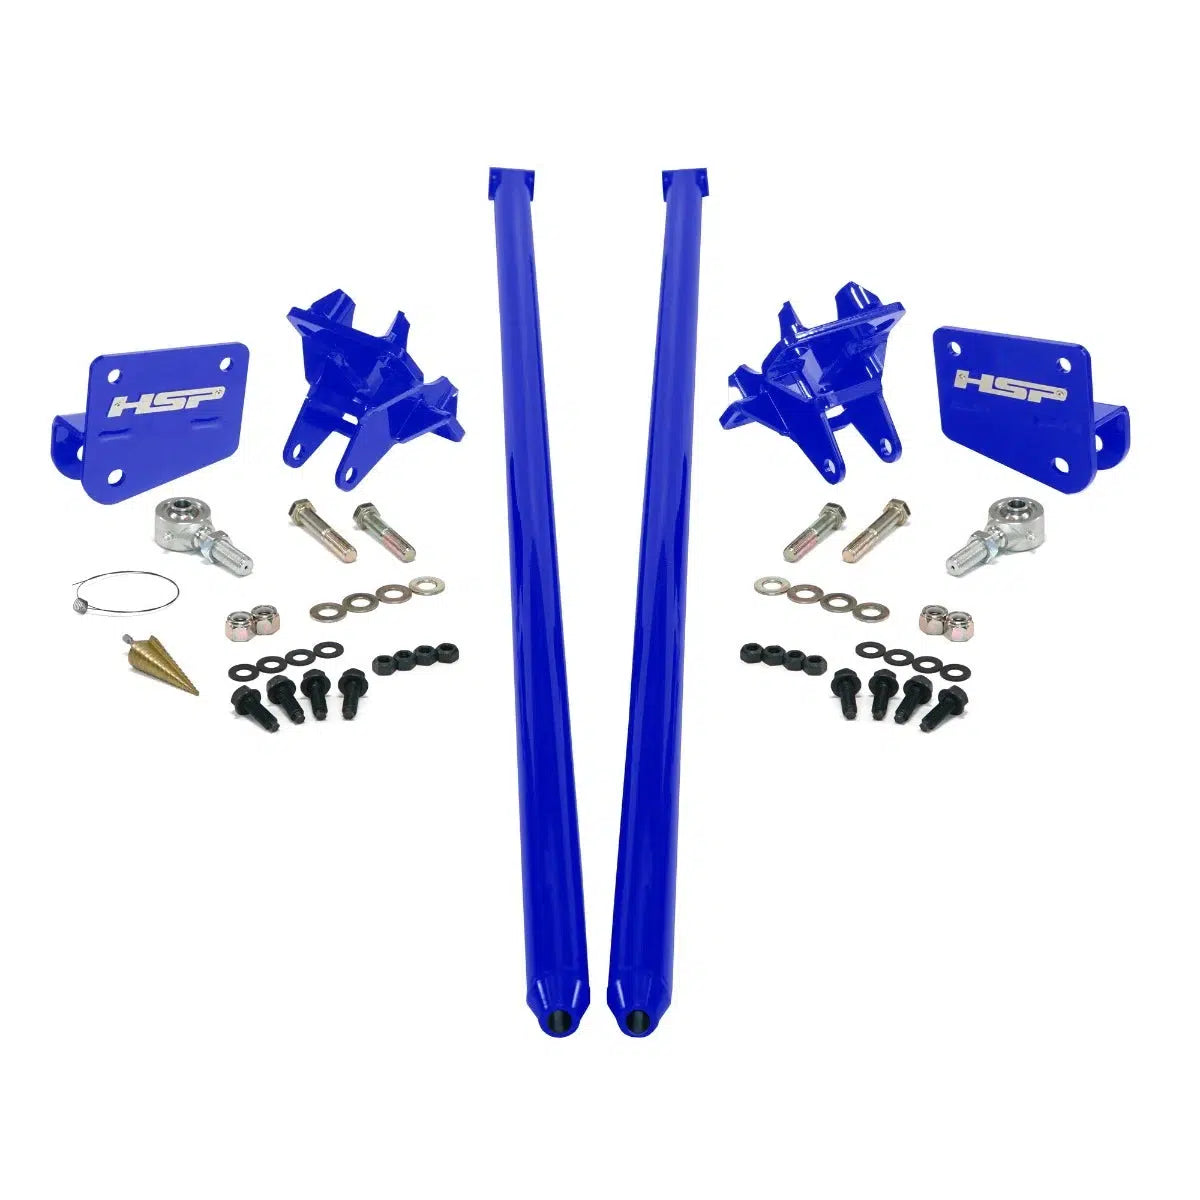 2011-2017 Powerstroke Traction Bars (ECLB,CCSB) (HSP-P-435-2-3-HSP)-Traction Bars-HSP Diesel-HSP-P-435-2-3-HSP-CB-Dirty Diesel Customs